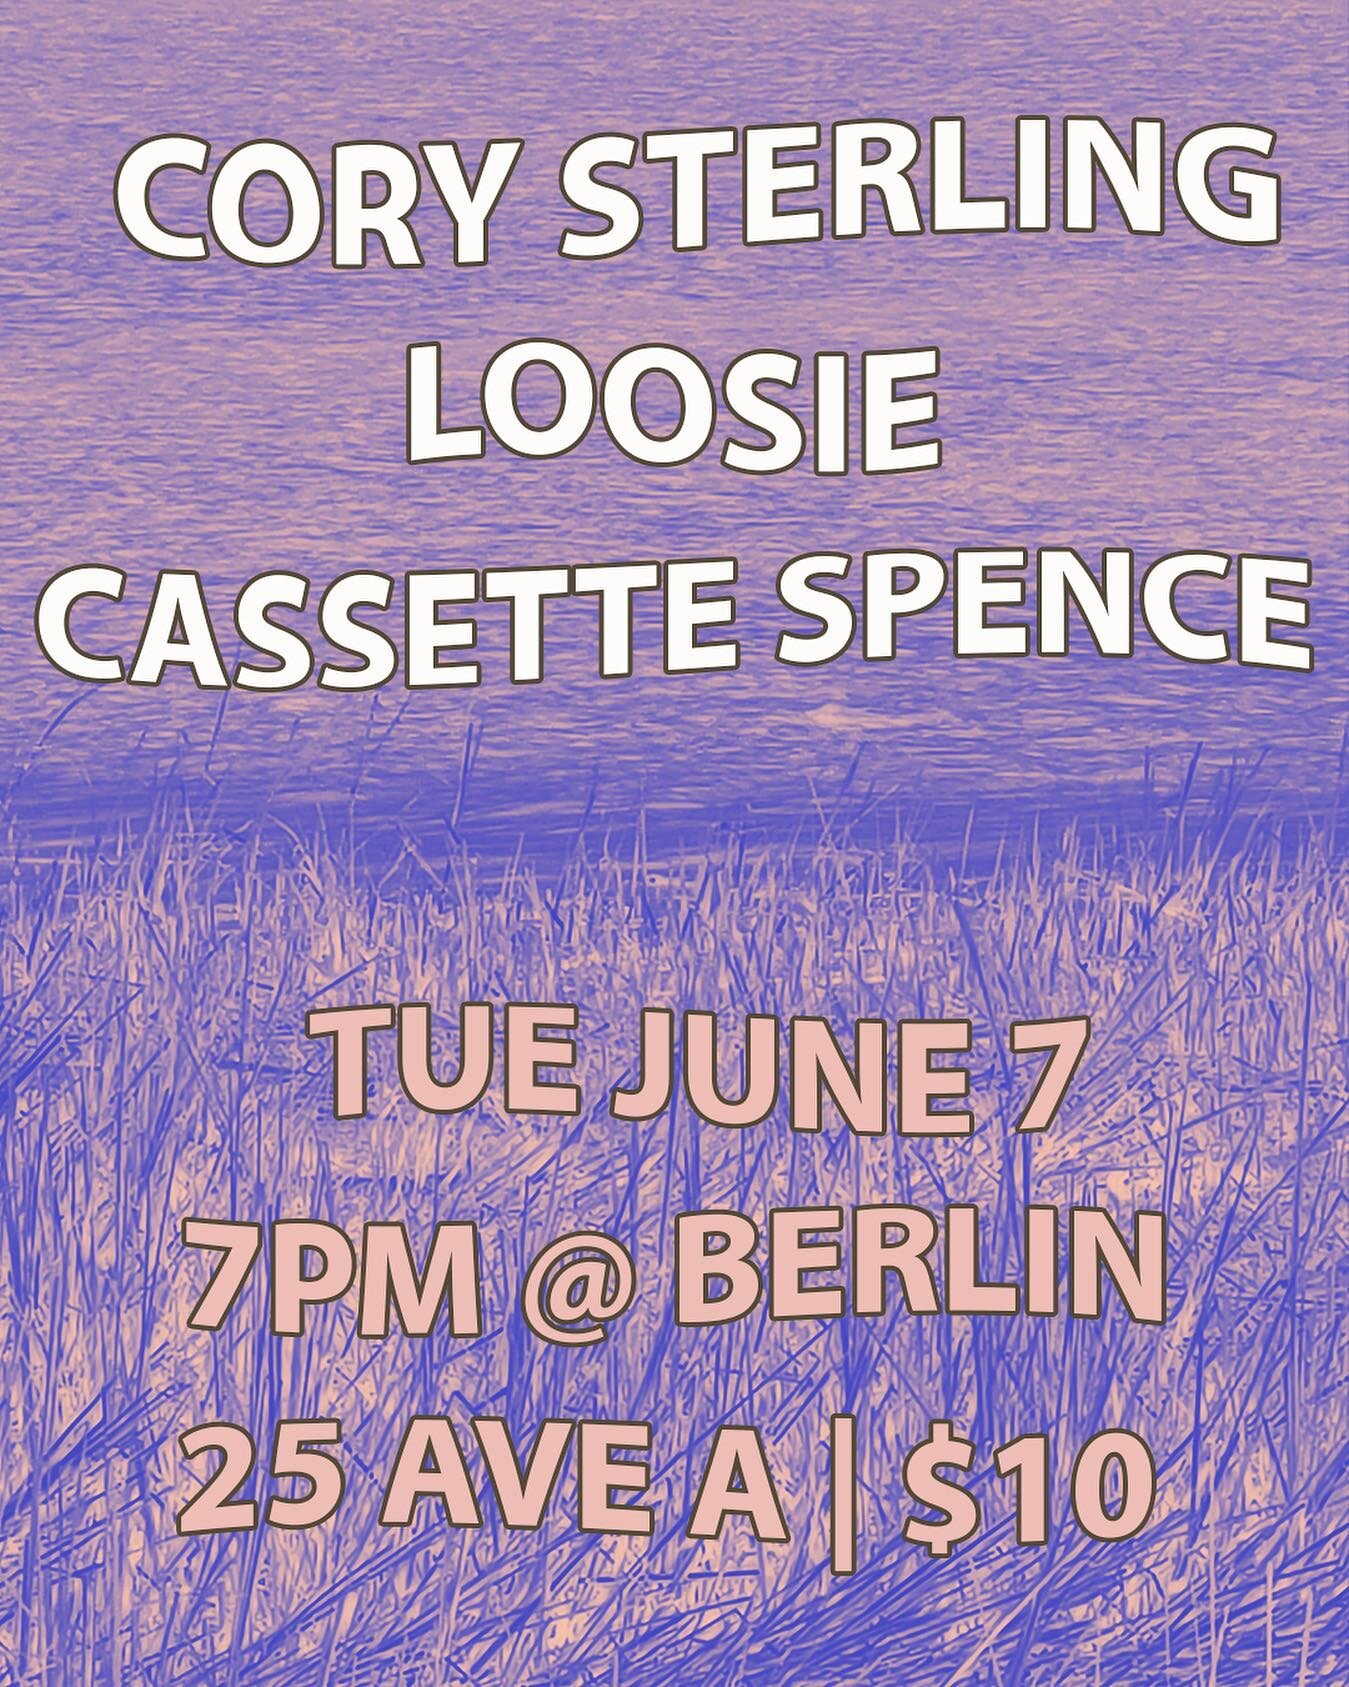 Back at it on Tue June 7 at @berlin.undernyc ! Extremely excited to get to play alongside @cassettespence and @corylps , two really inspiring songwriters SMASH that young link in our profile&mdash;inflation be damned this joyful night is a kind $10 t